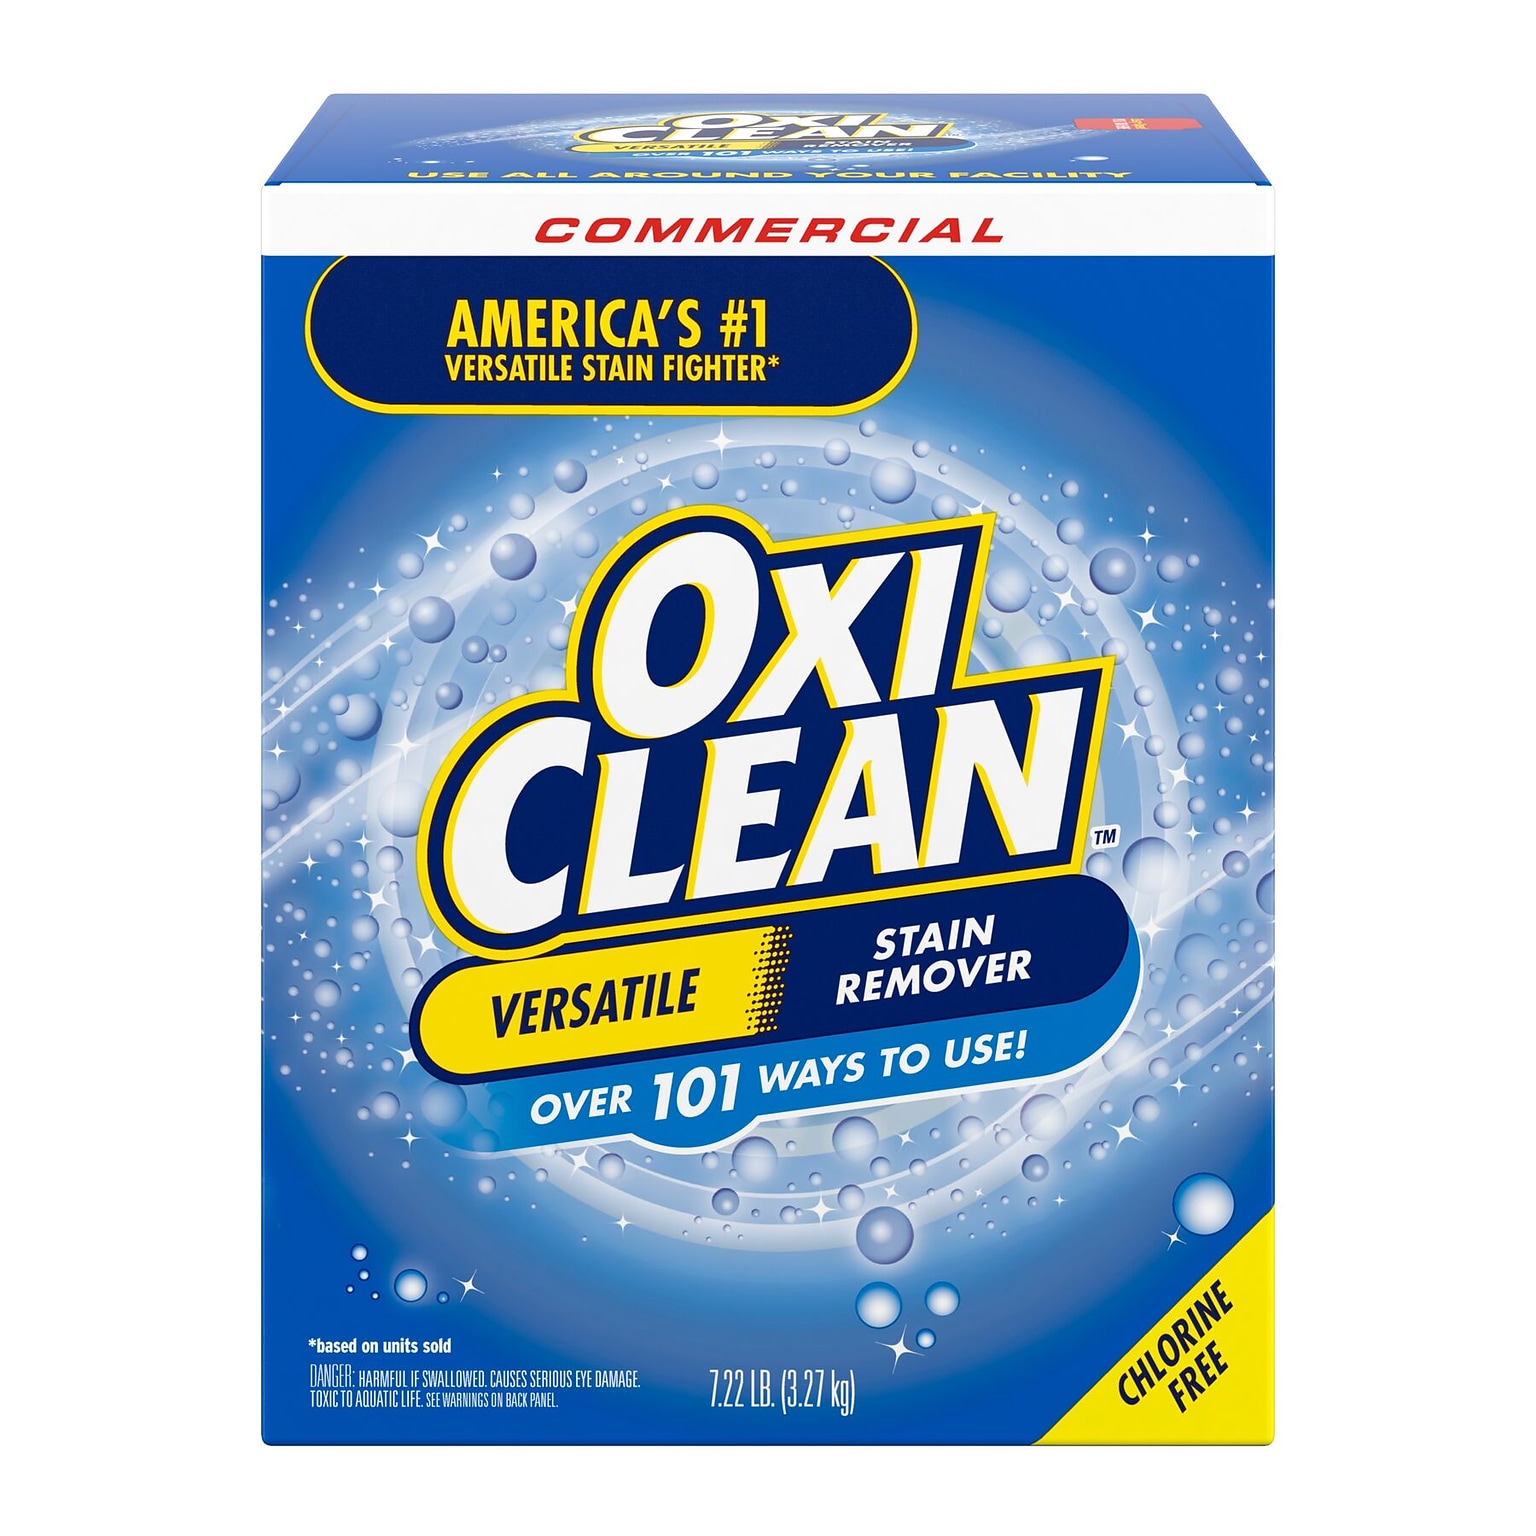 OxiClean Versatile Laundry Stain Remover, Regular, 115.52 oz. (5703700069)